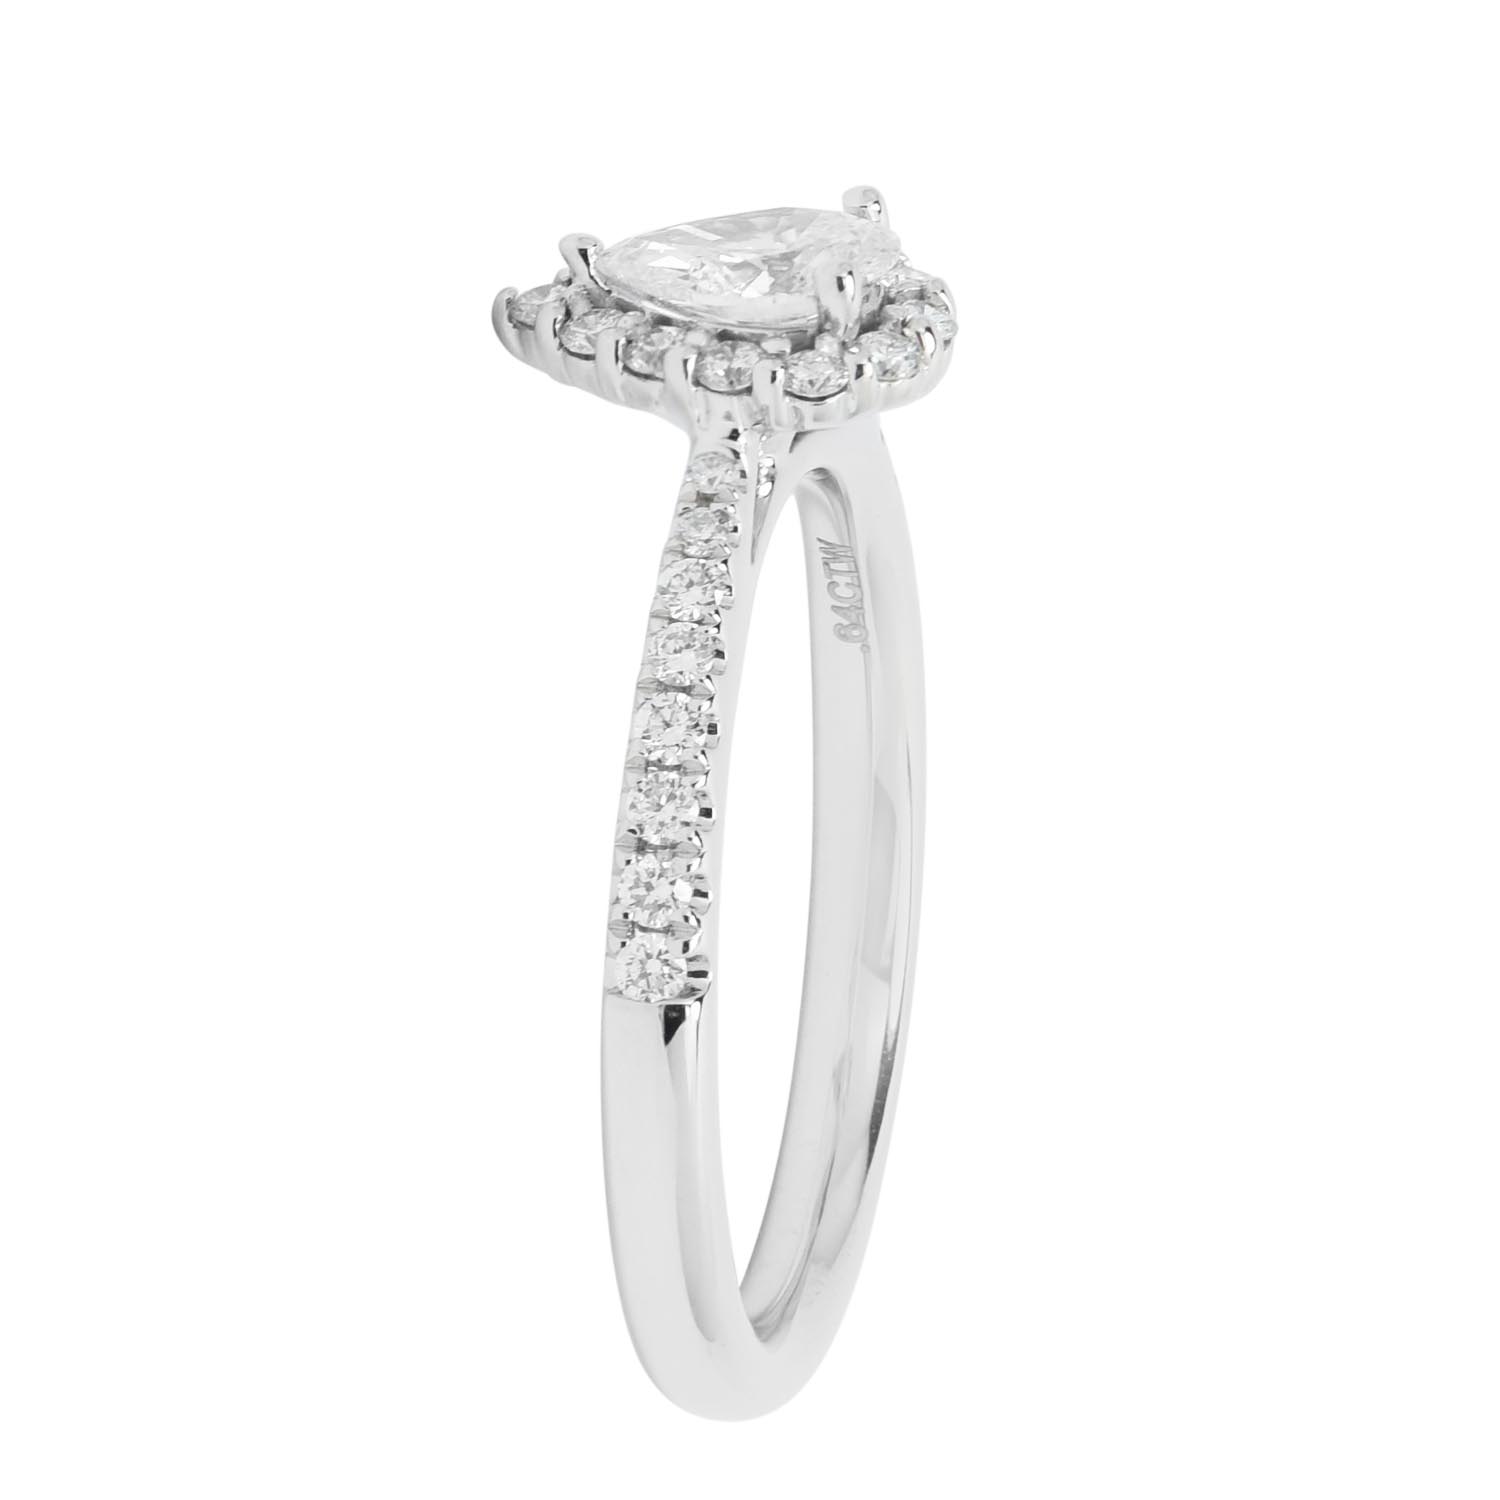 Northern Star Pear Diamond Halo Bridal Set in 14kt White Gold (3/4ct tw)